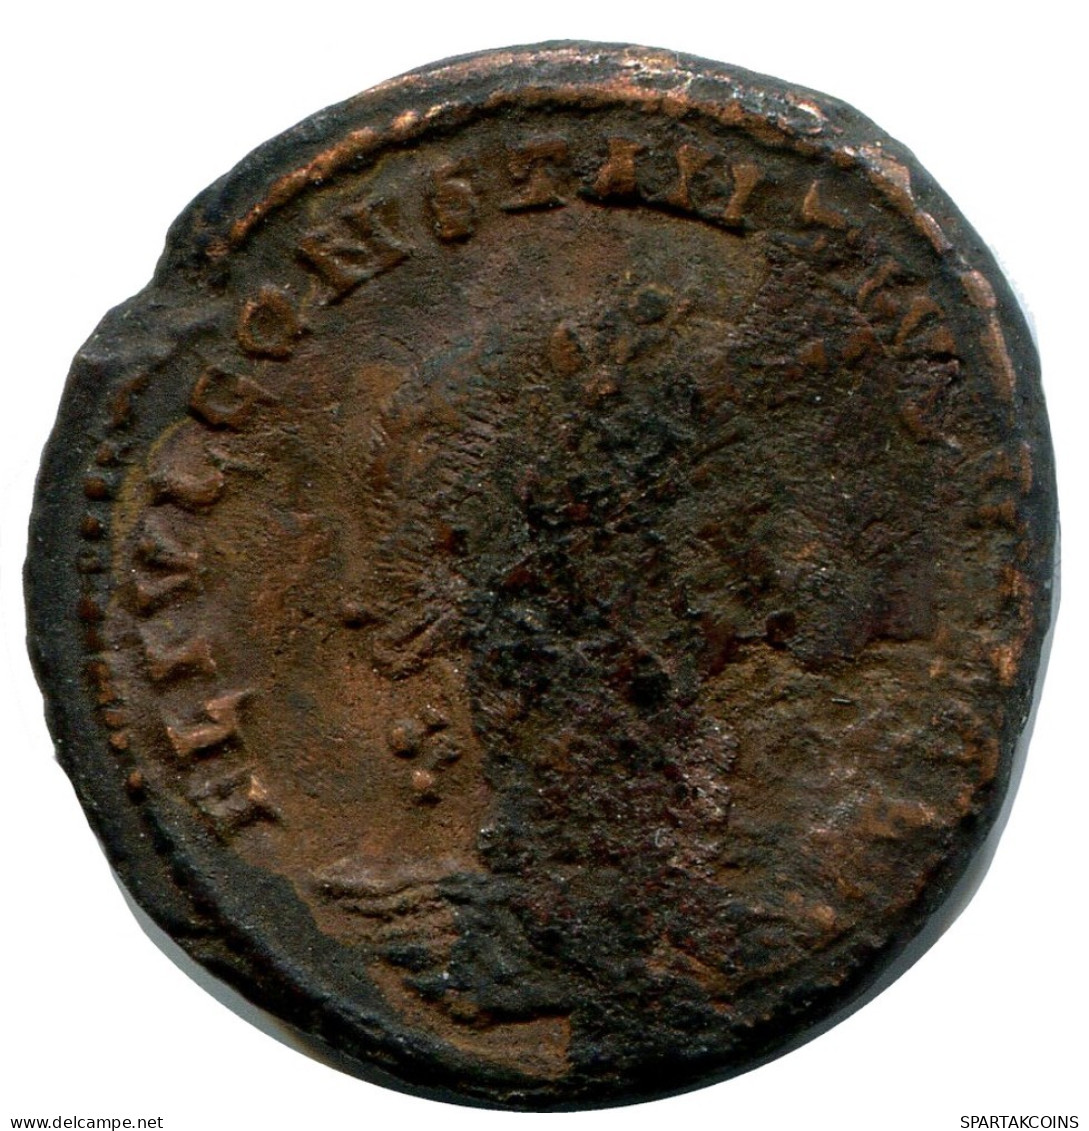 CONSTANTIUS II MINTED IN ALEKSANDRIA FOUND IN IHNASYAH HOARD #ANC10199.14.U.A - The Christian Empire (307 AD To 363 AD)